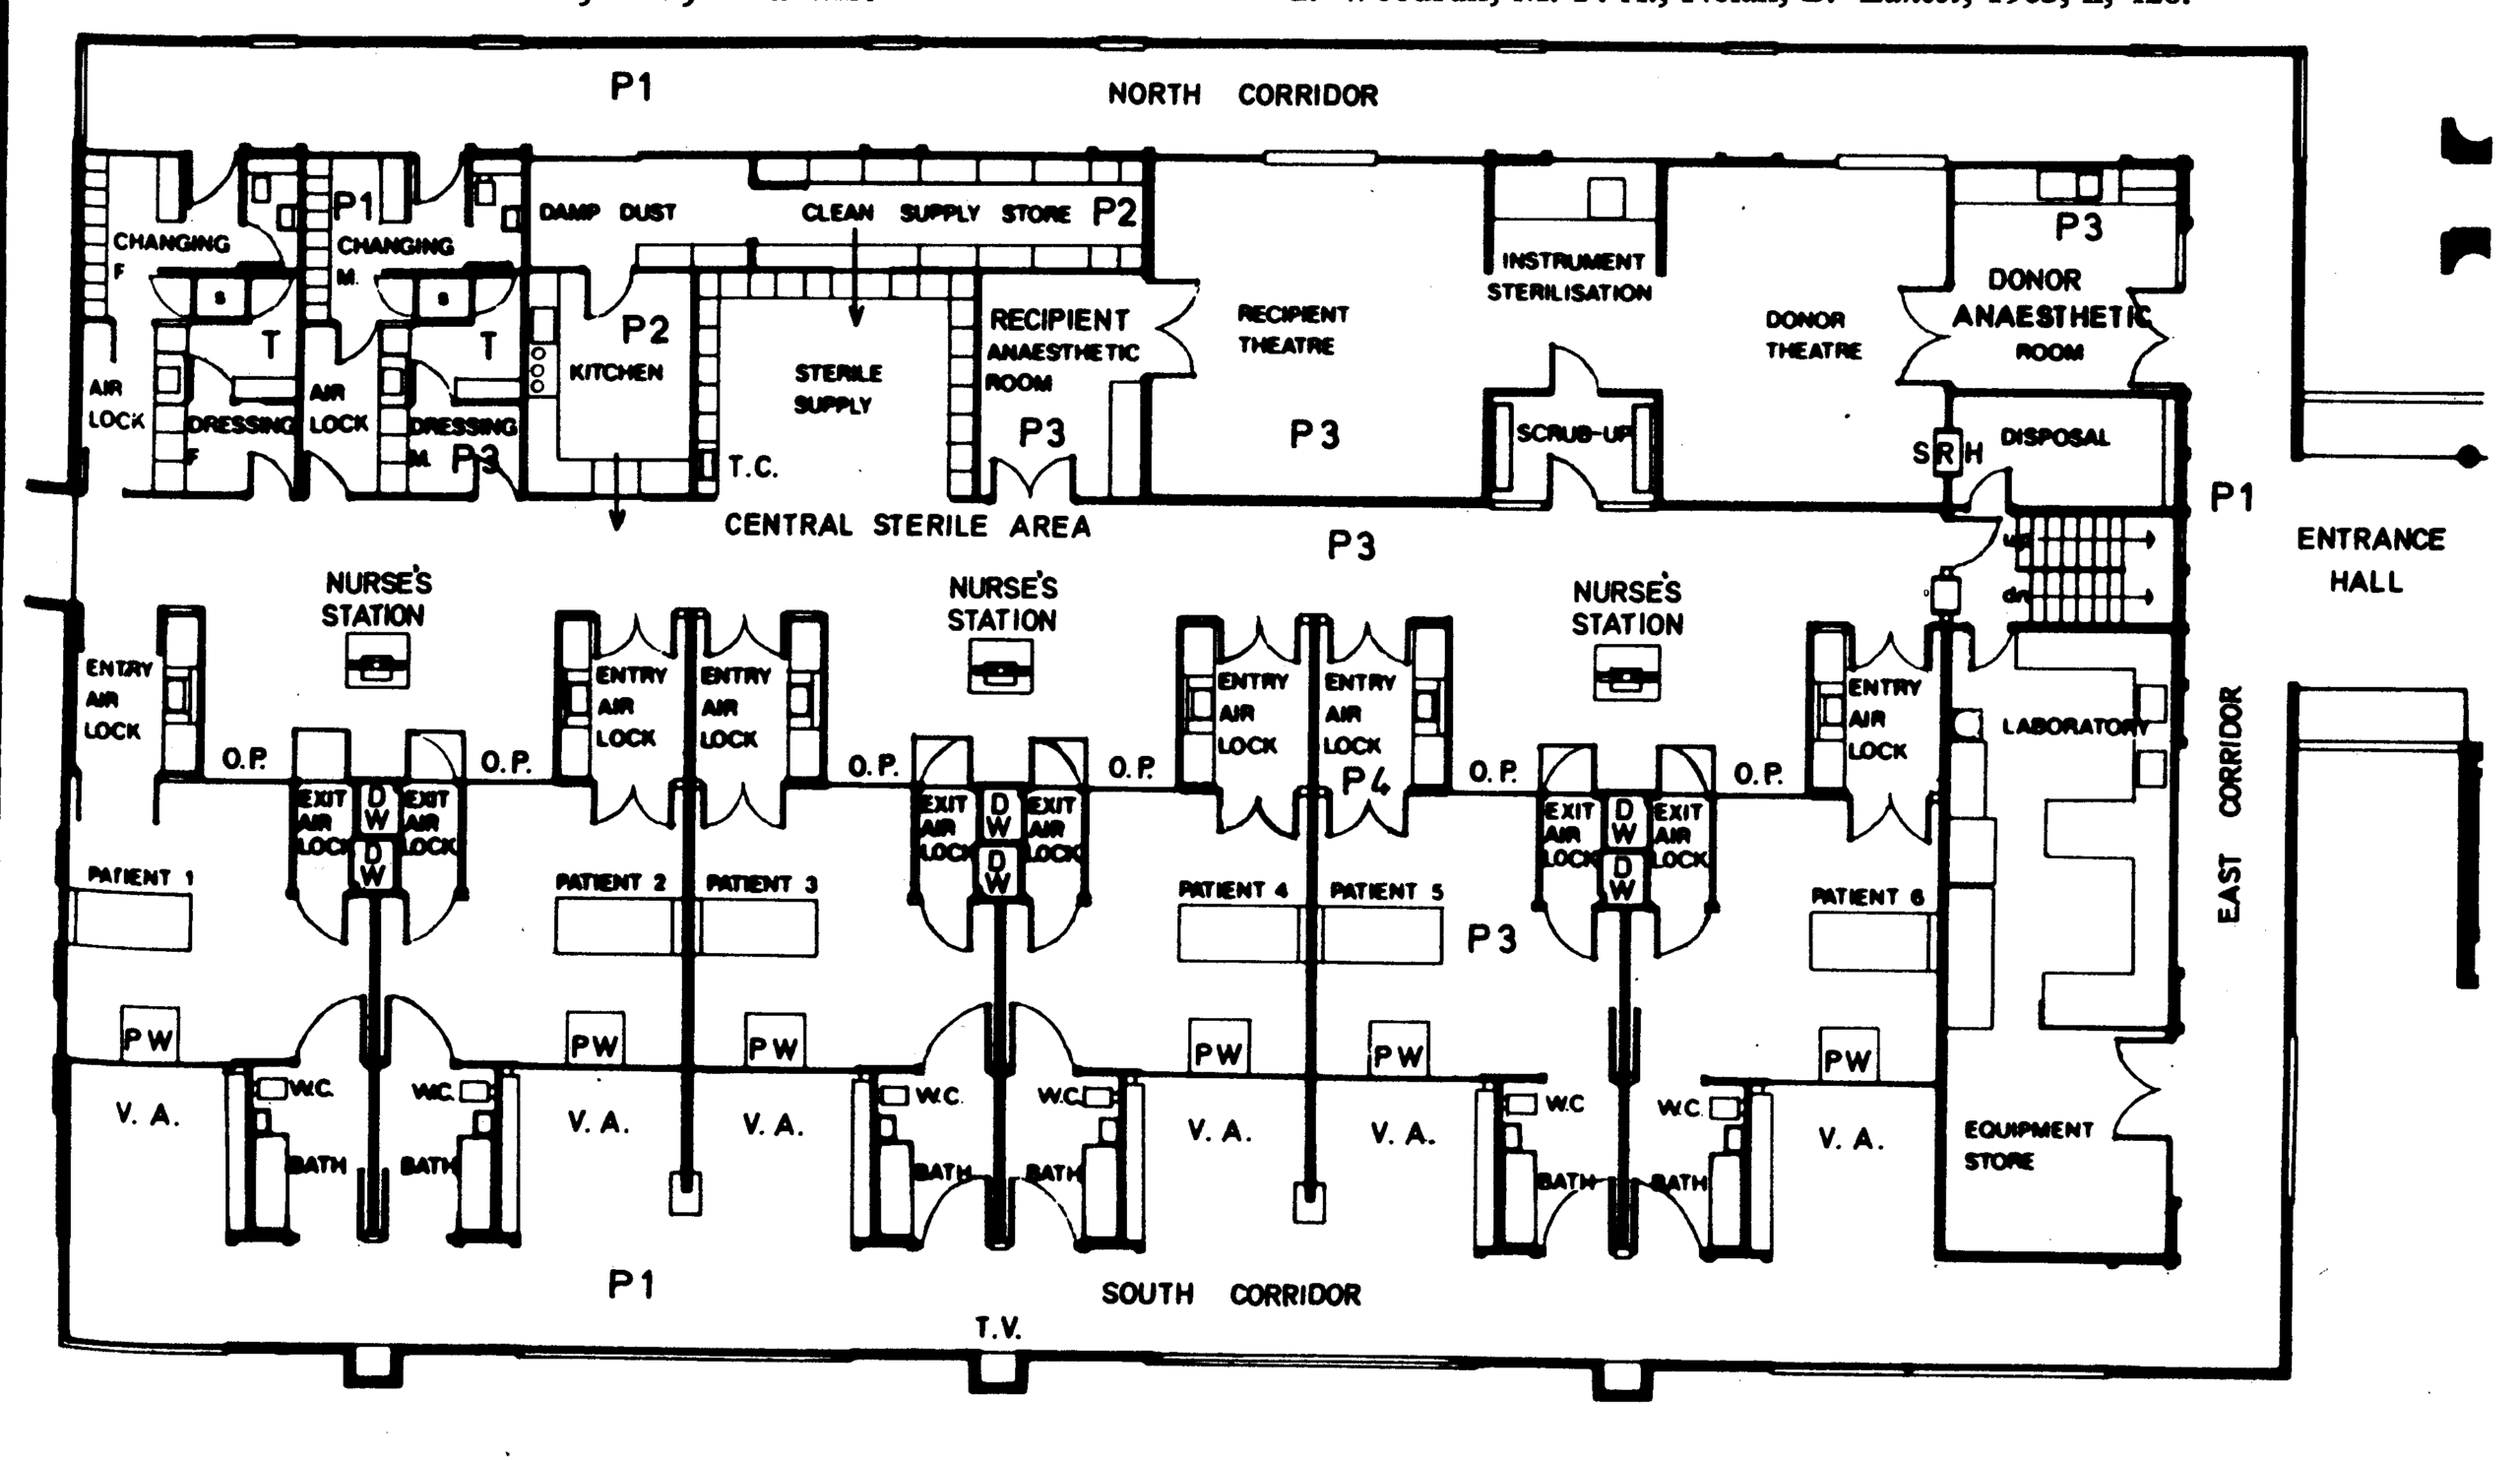 Plan for the Nuffield transplant unit in Edinburgh, late 1960s. Multiple units were built to a similar pattern.